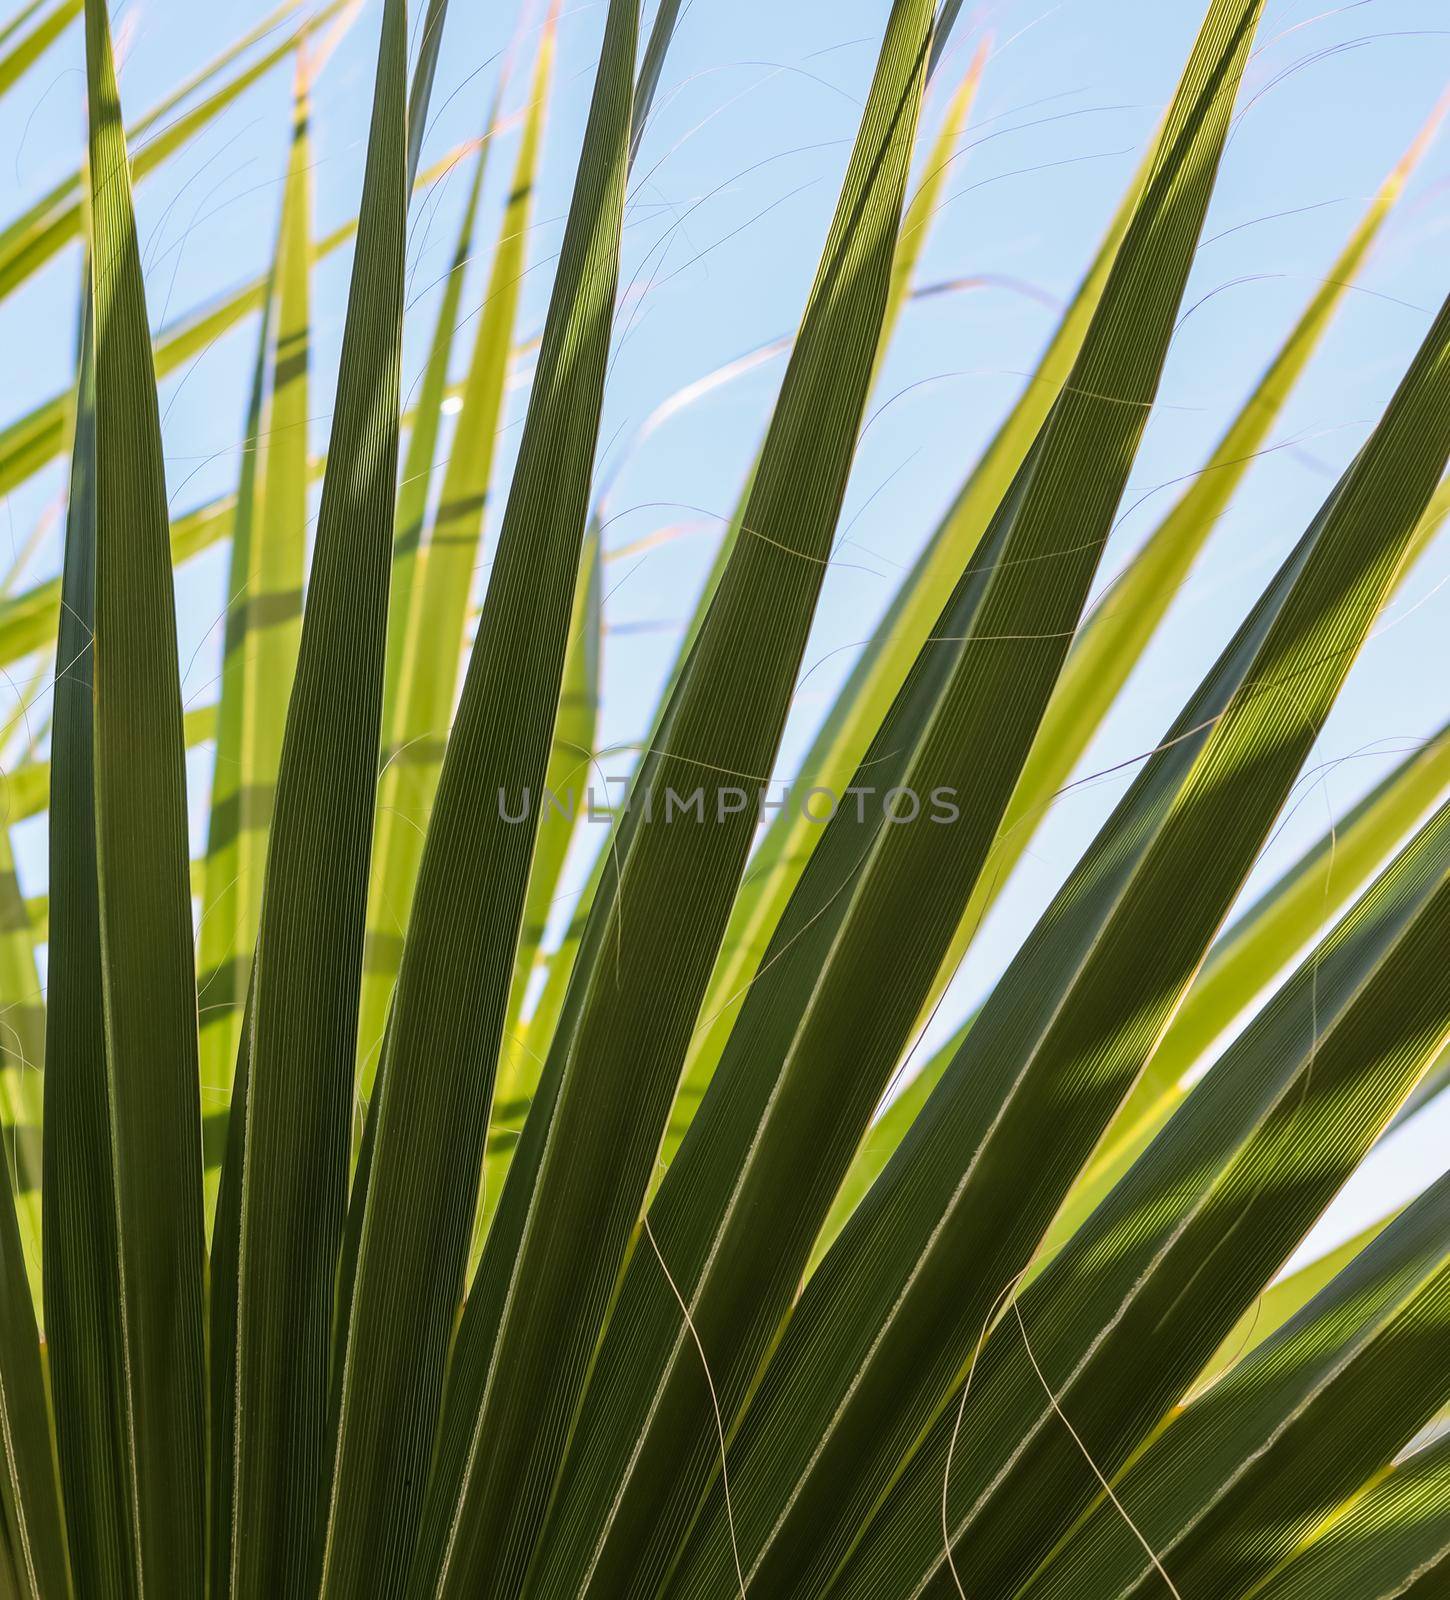 Palm leaves on blue sky background in summertime. Summer holiday and tropical nature concept.